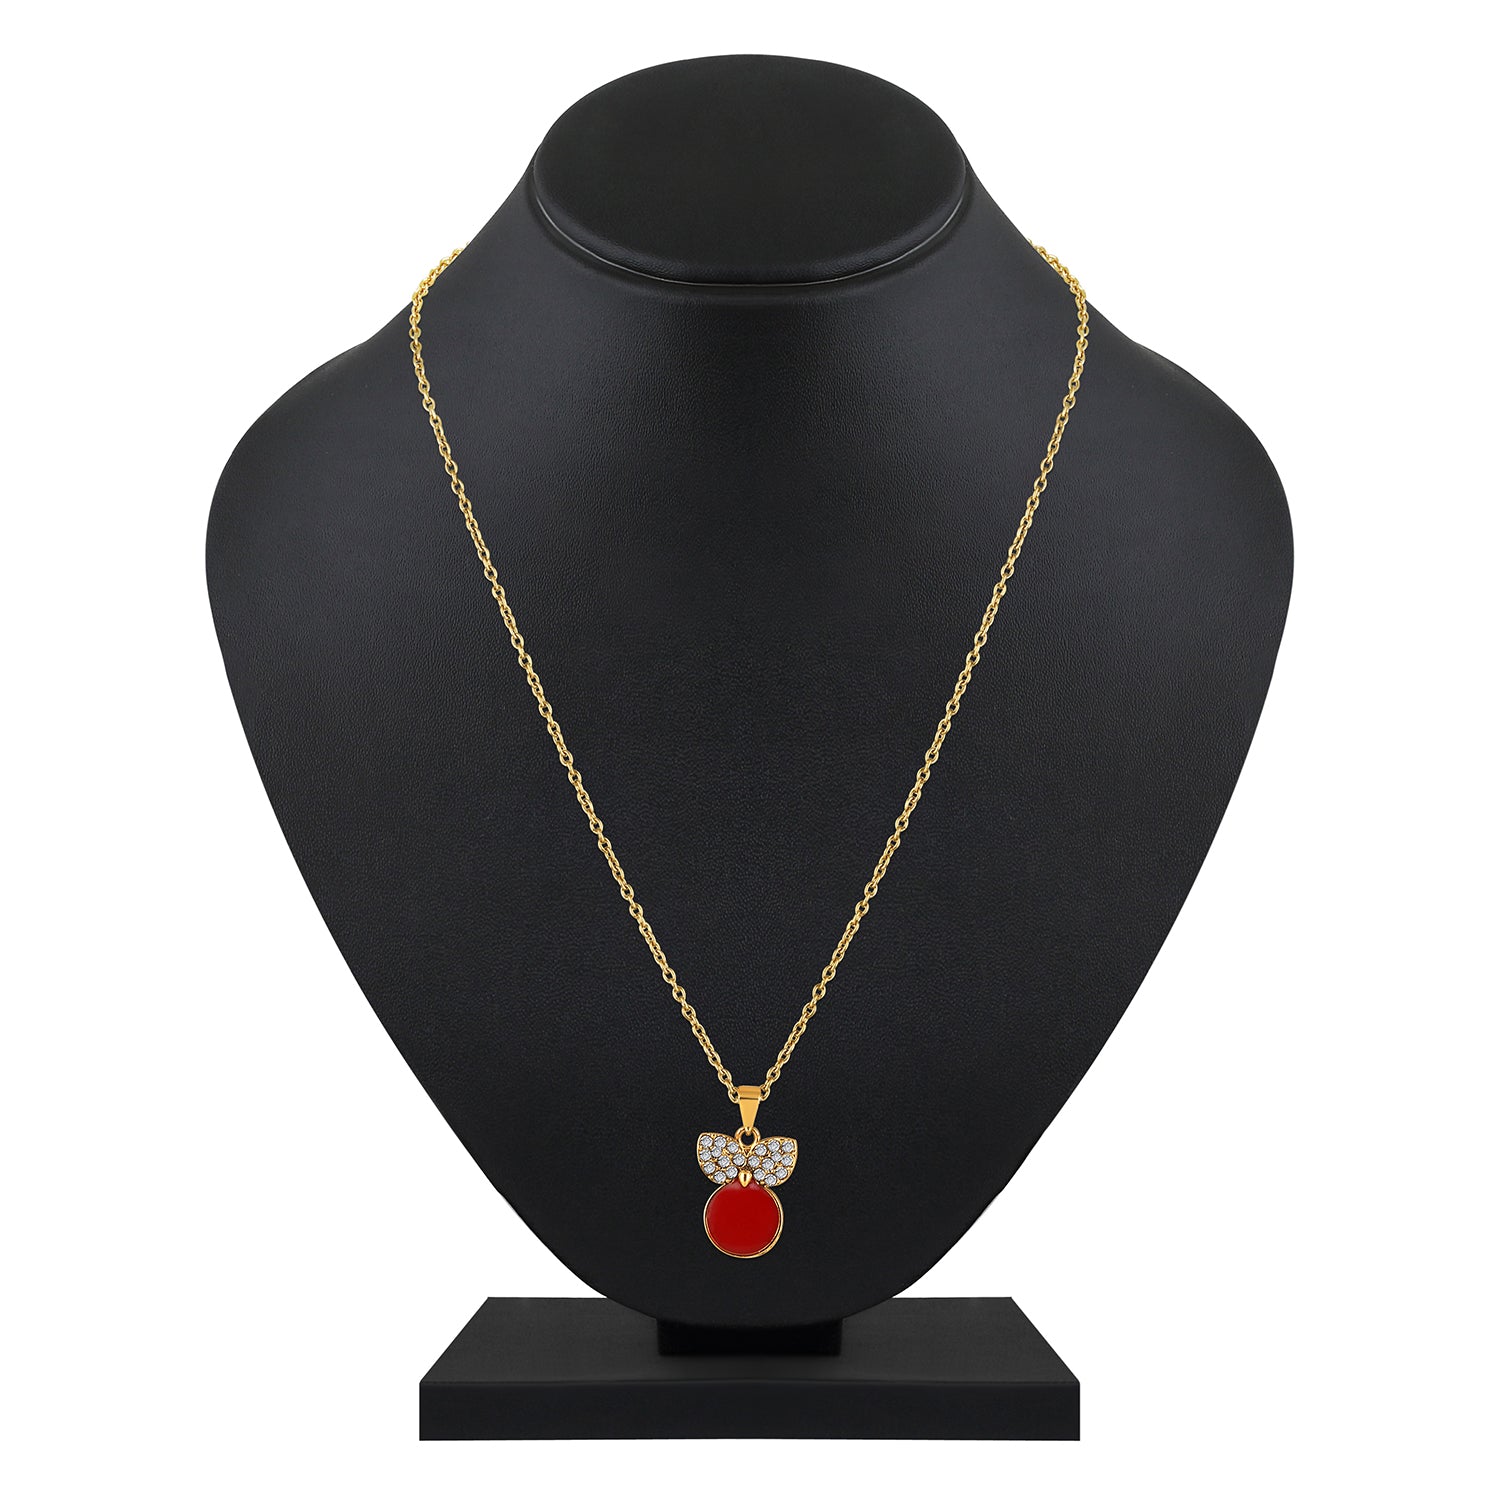 Red Meenakari Work and Crystals Cute Necklace Pendant